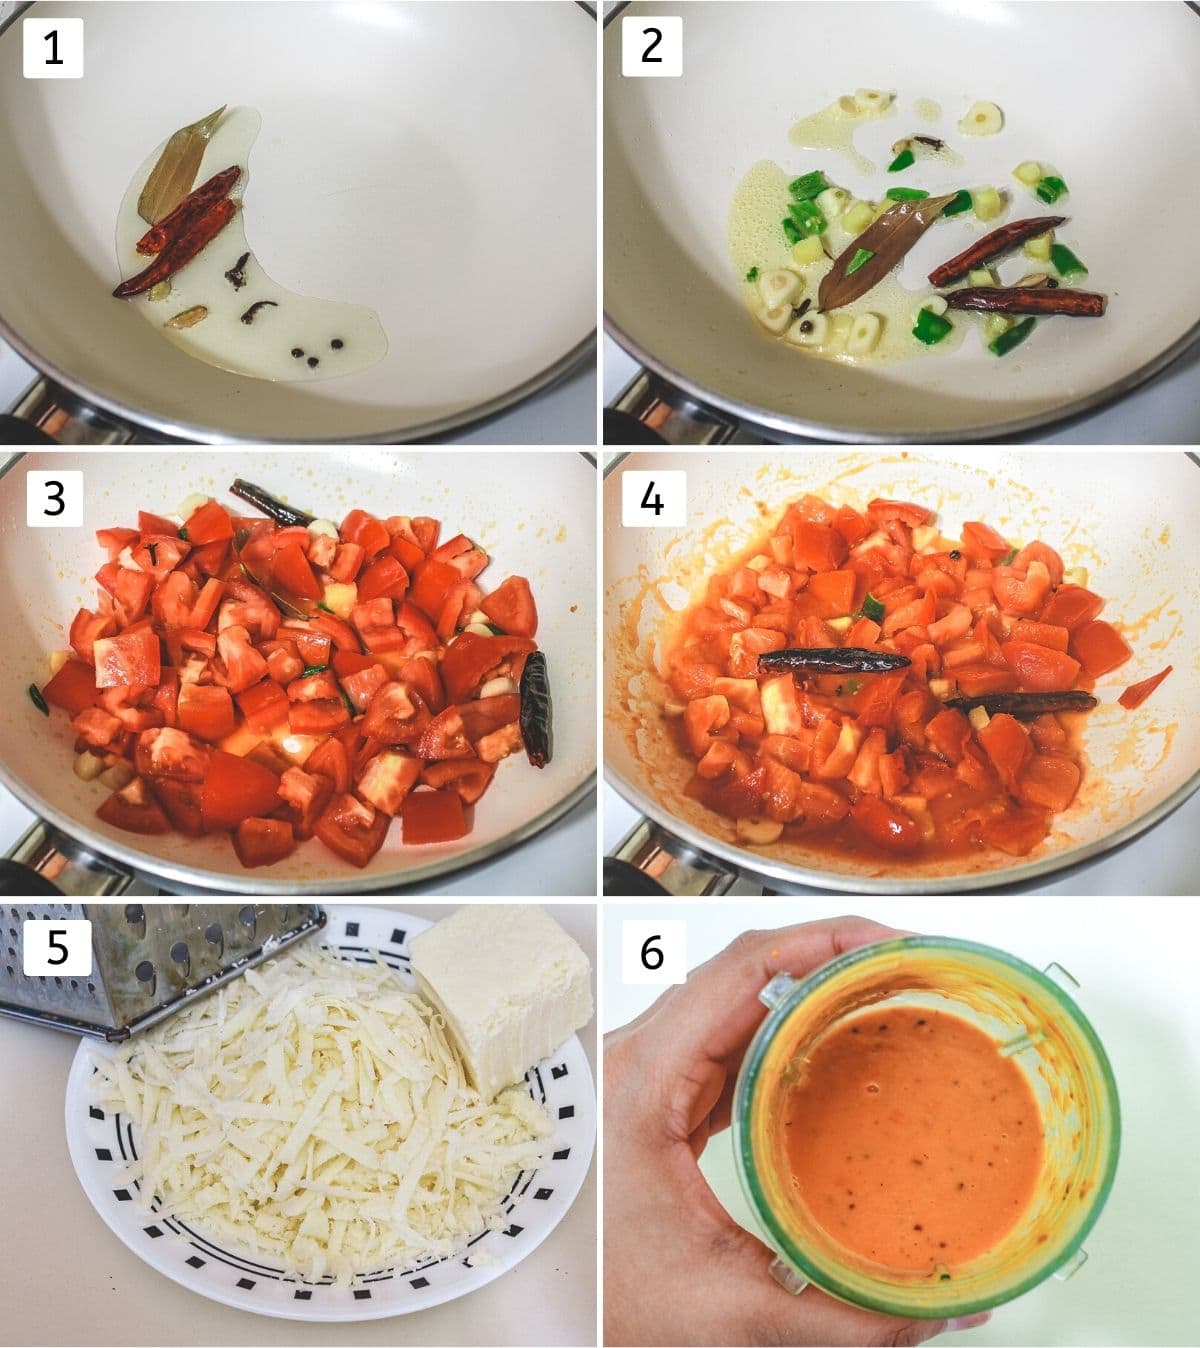 Collage of 6 images showing sauteing whole spices, ginger, garlic and tomatoes, grating paneer and grinding tomato mixture.